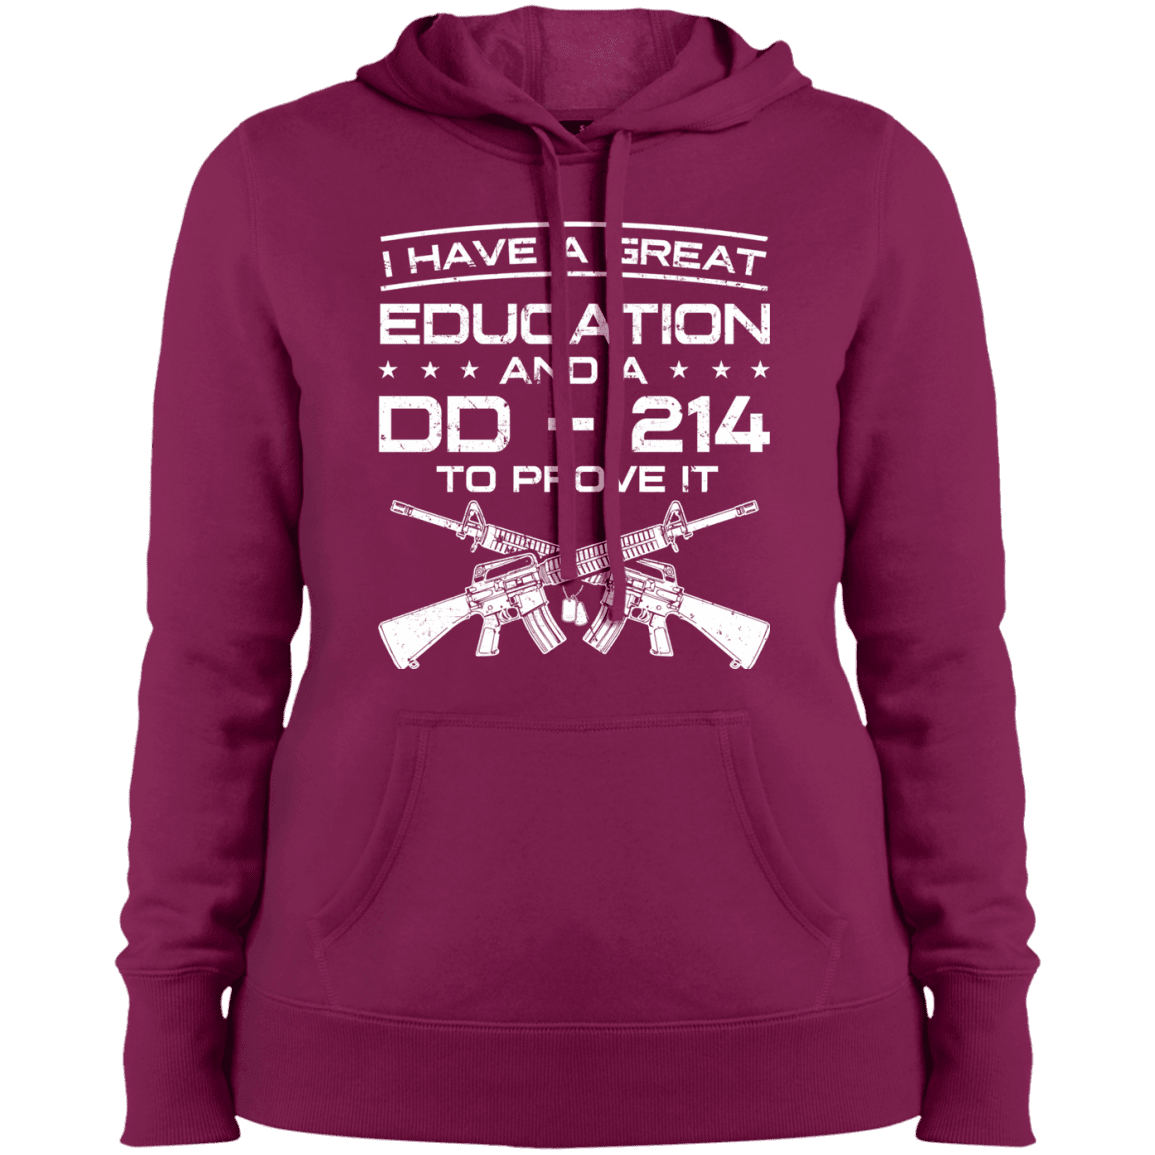 Military T-Shirt "I Have A Great Education And A DD 214 To Prove It - Women" Front-TShirt-General-Veterans Nation